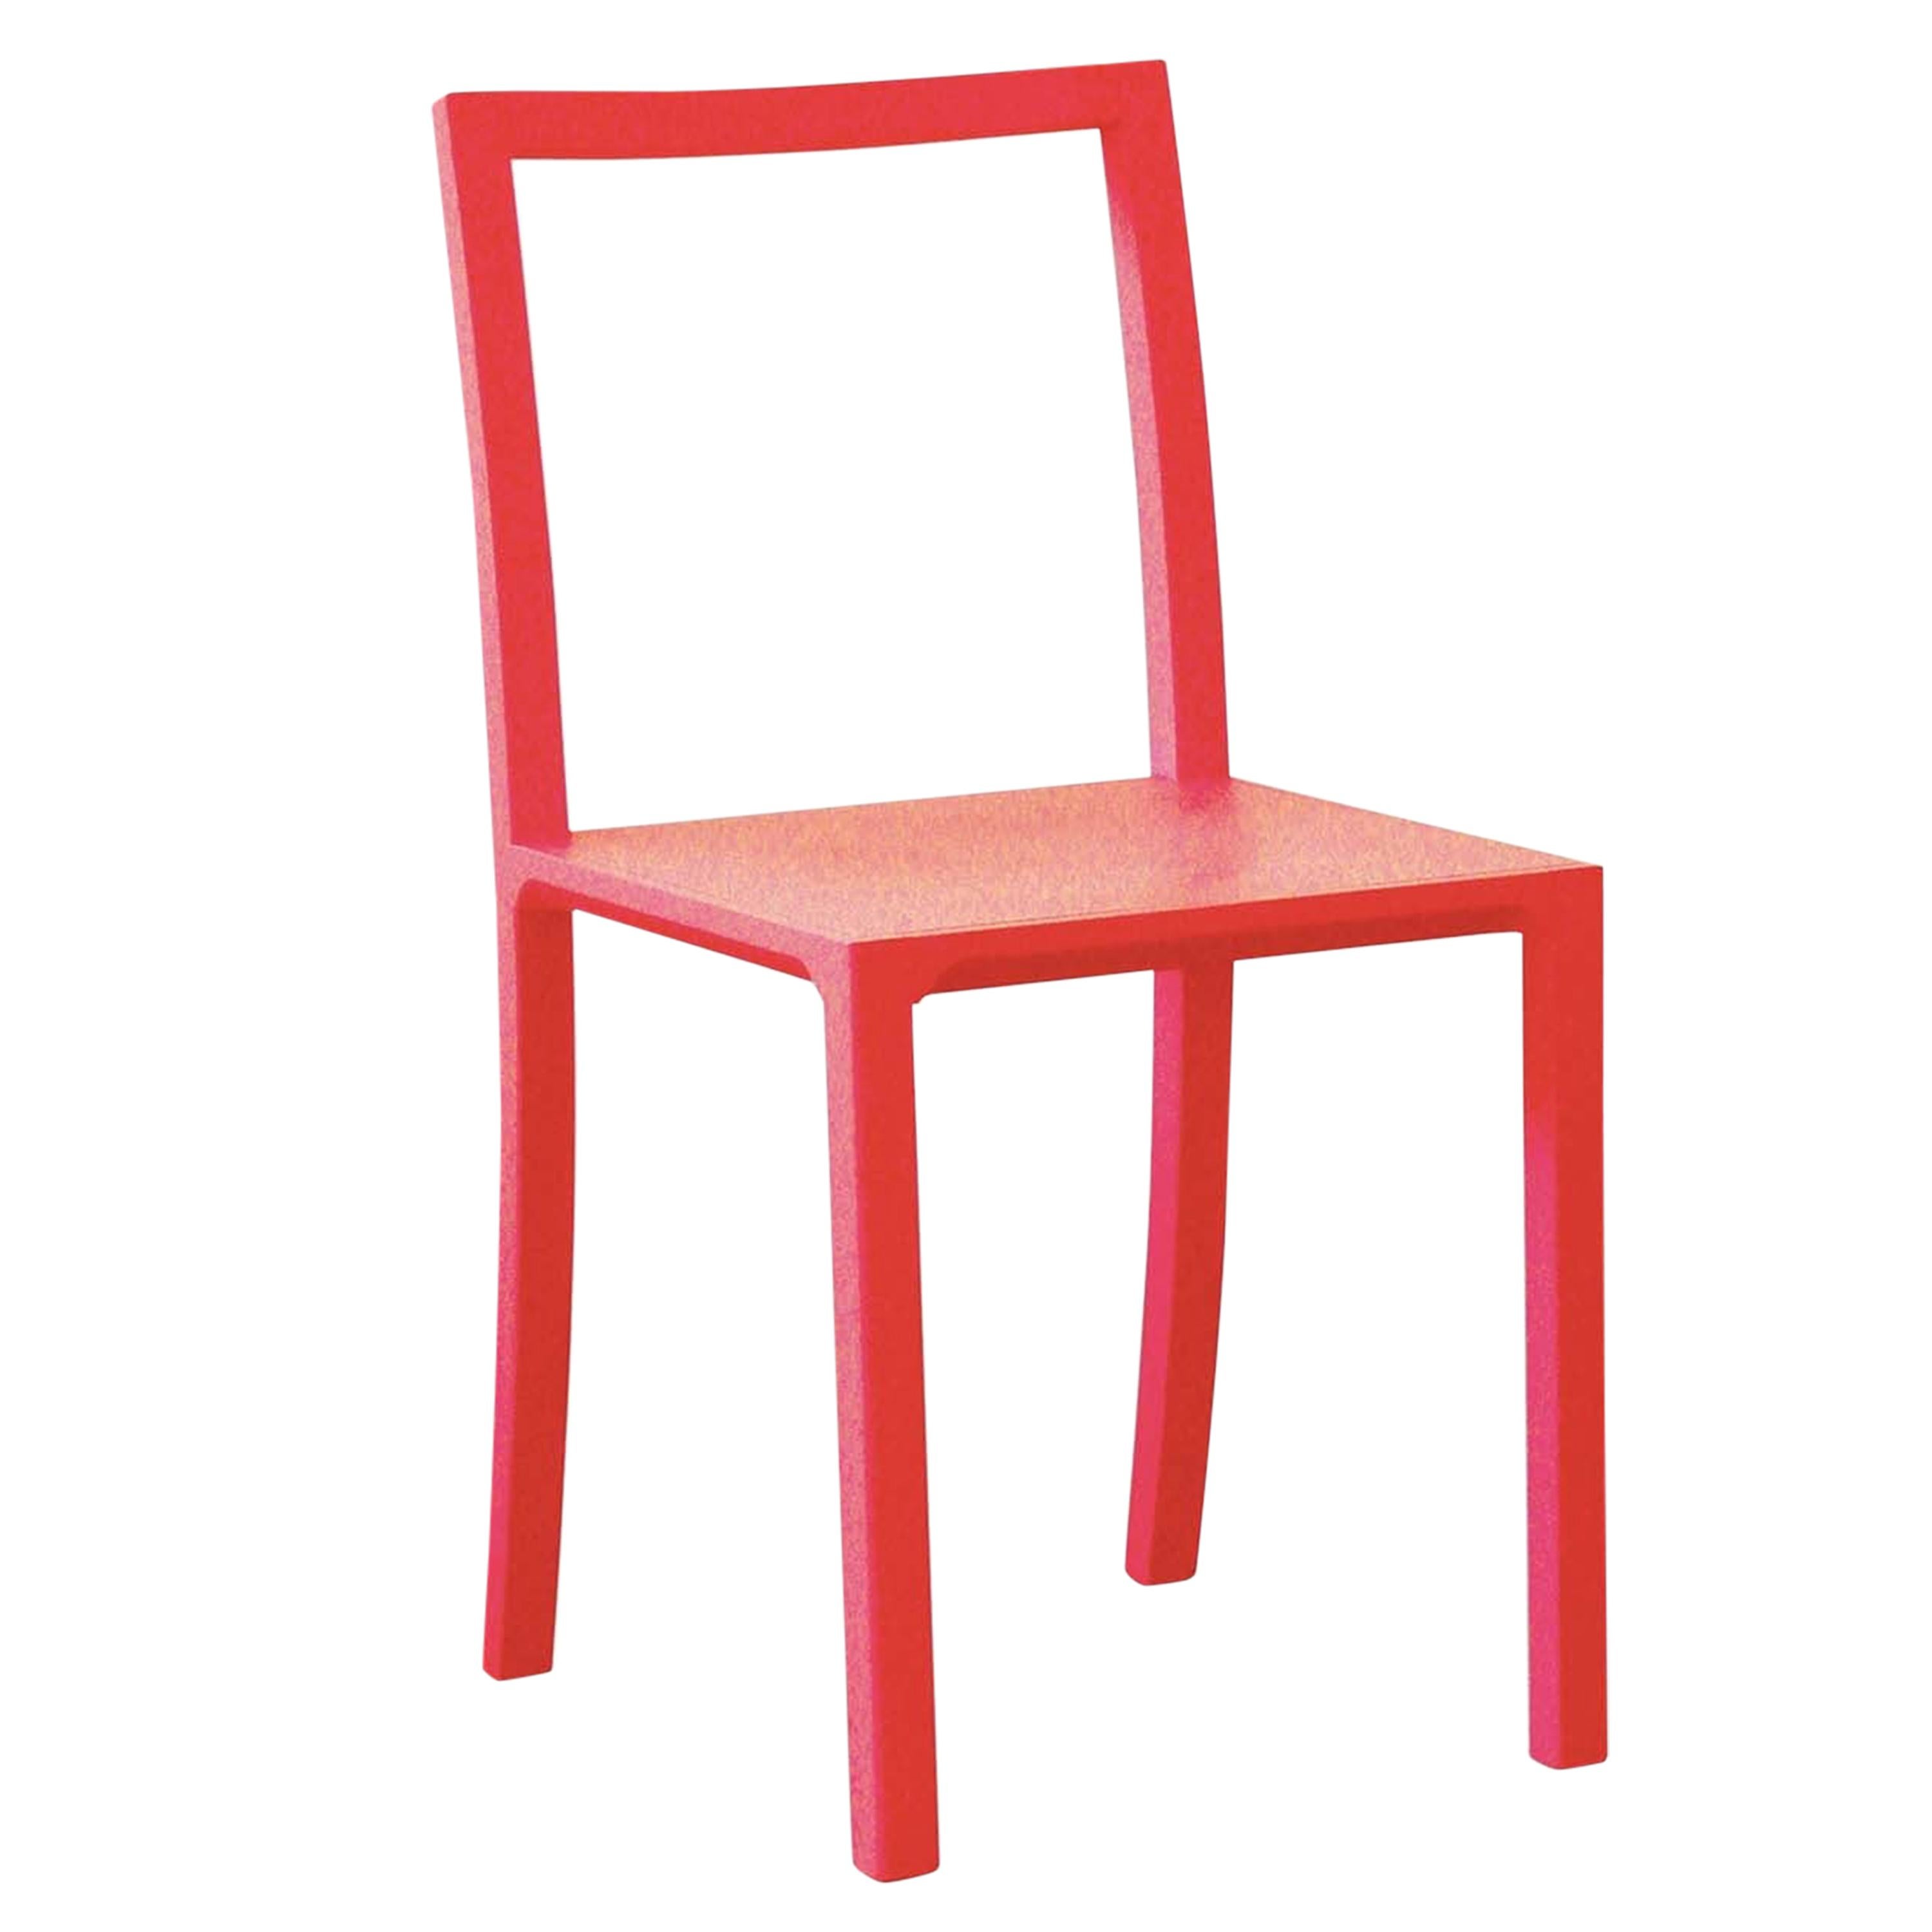 Framework Set of 2 Red Brick Chairs by Steffen Kehrle